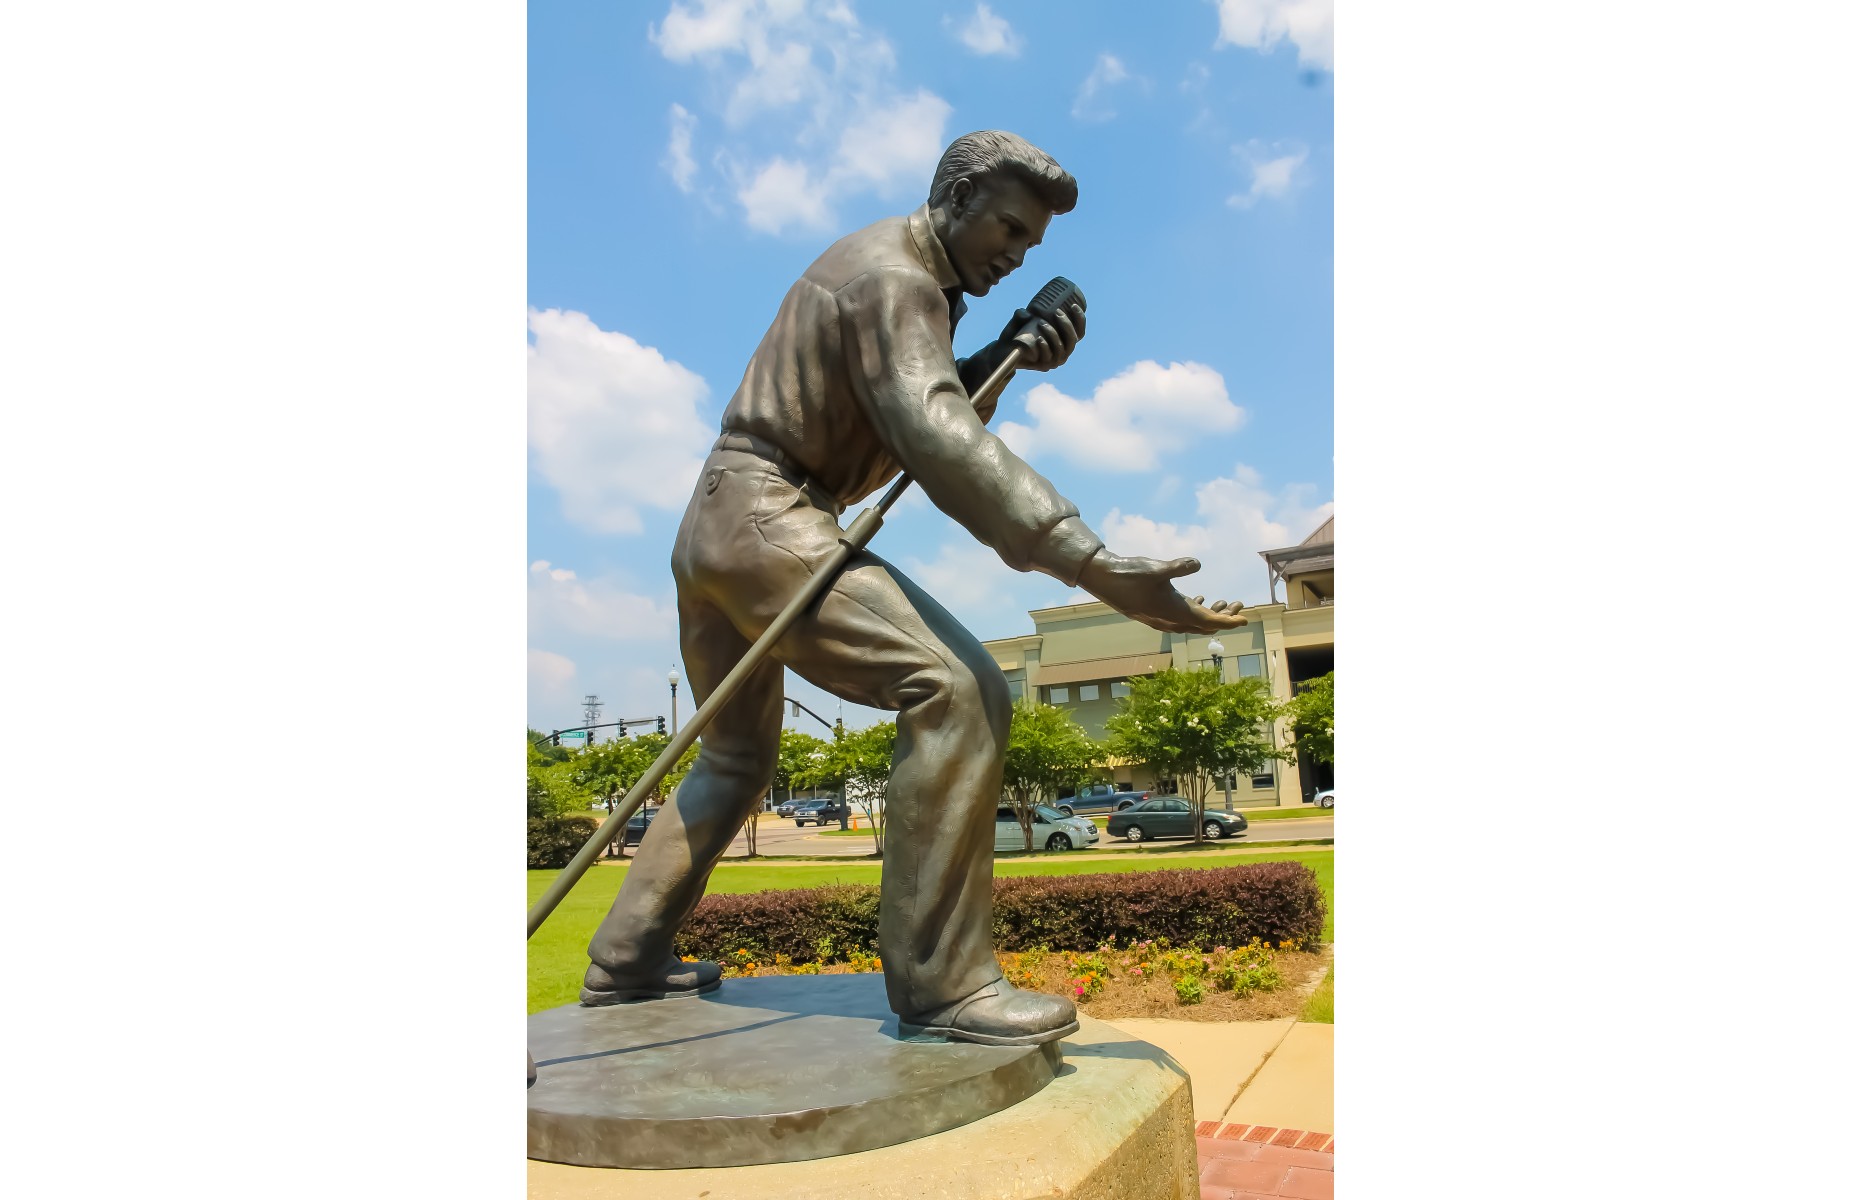 Elvis Statue (Image: The Courage to Travel/Shutterstock)